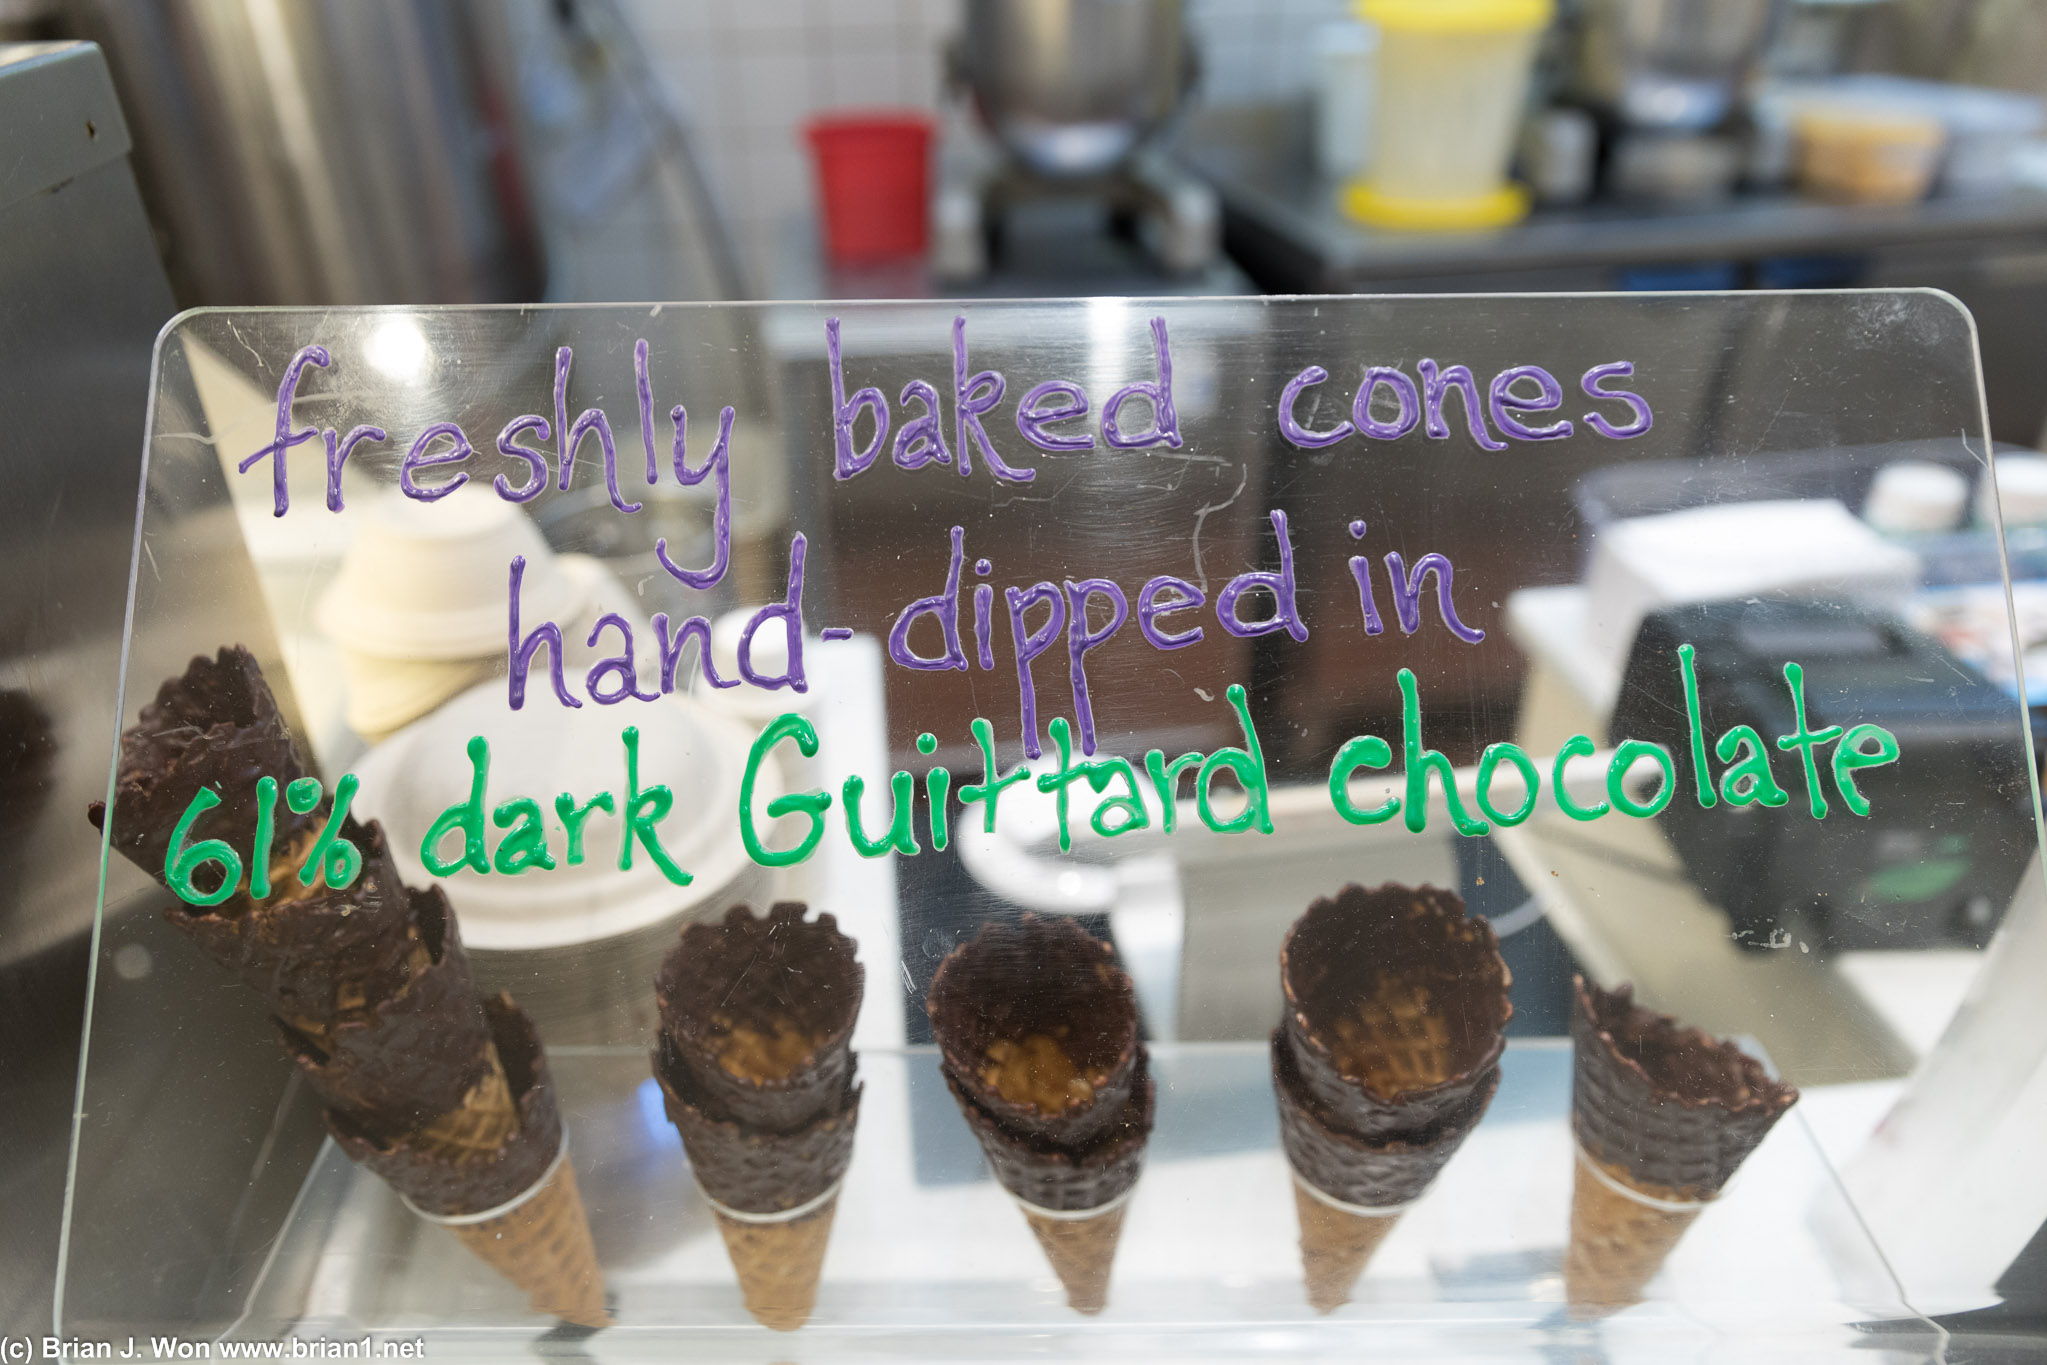 Chocolate-dipped waffle cones????